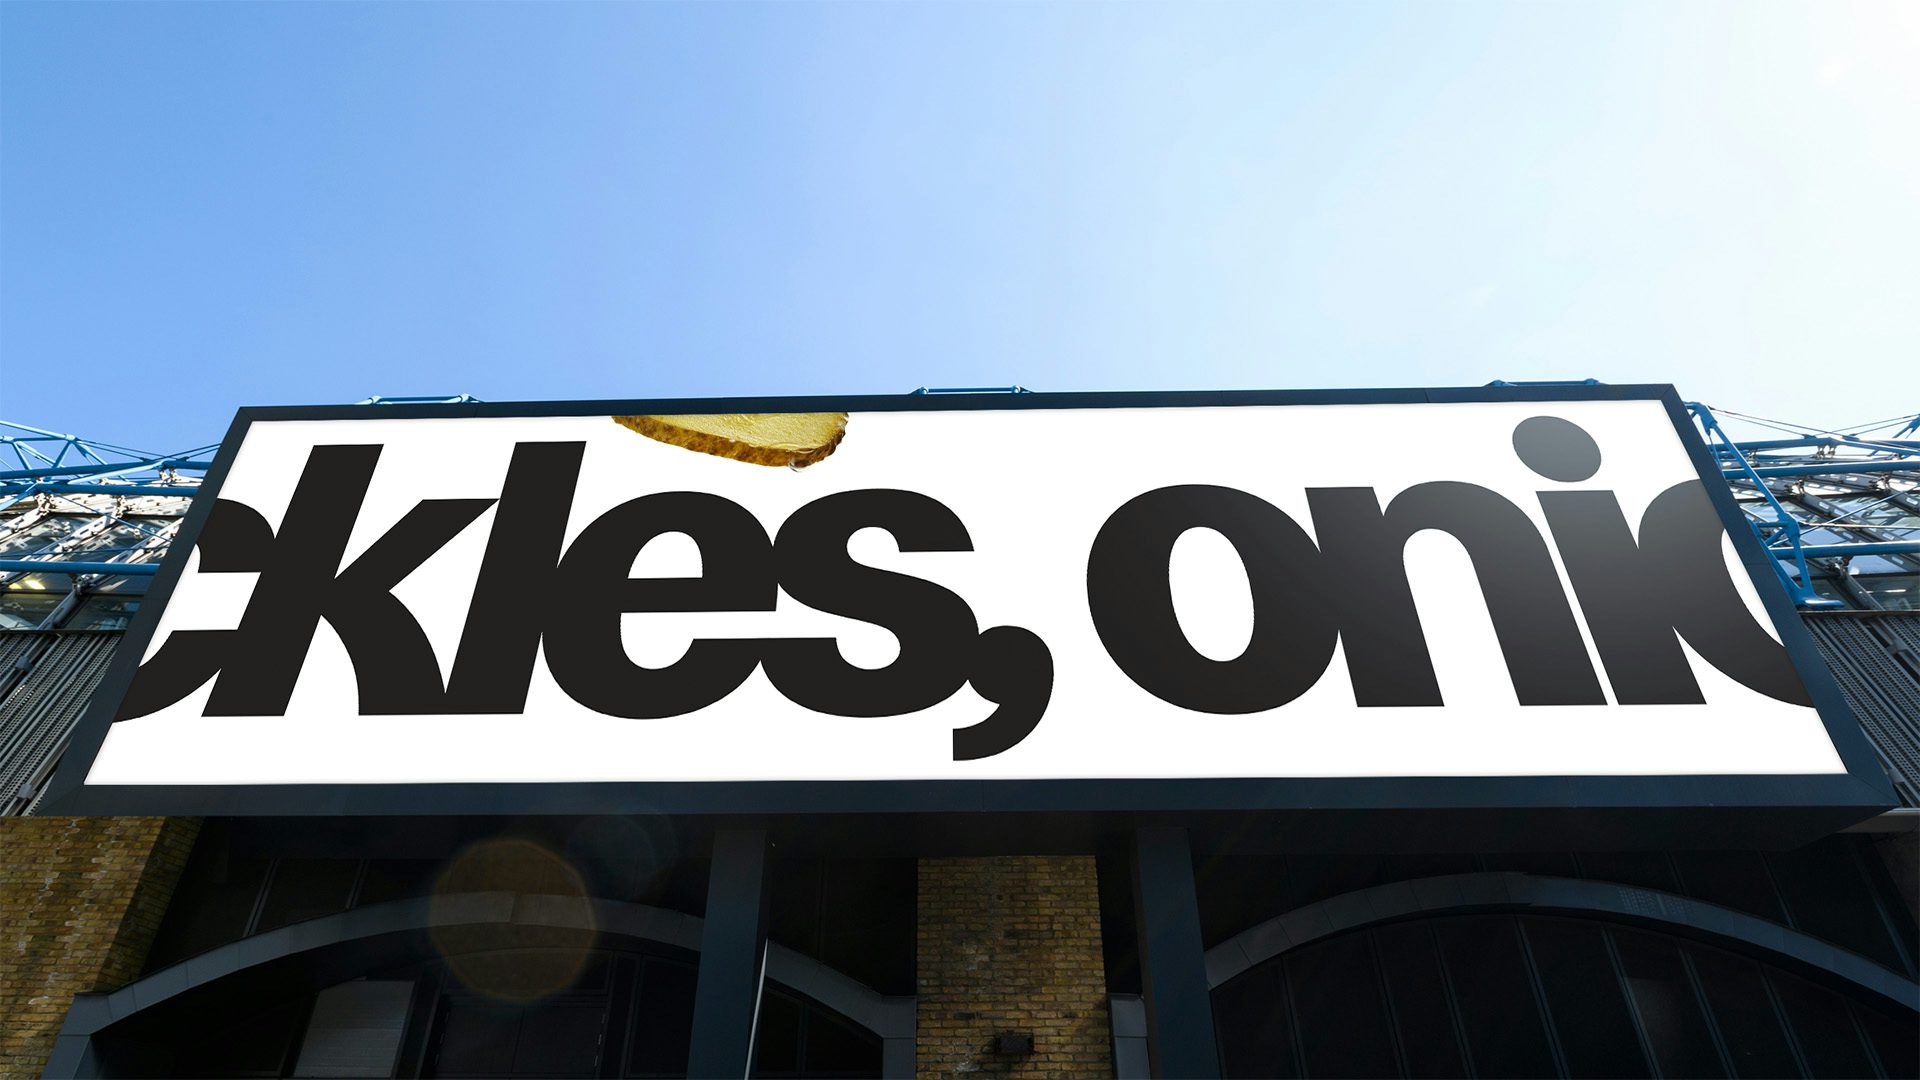 Billboard featuring a deliberately cut-off line that reads 'ckles, onio'